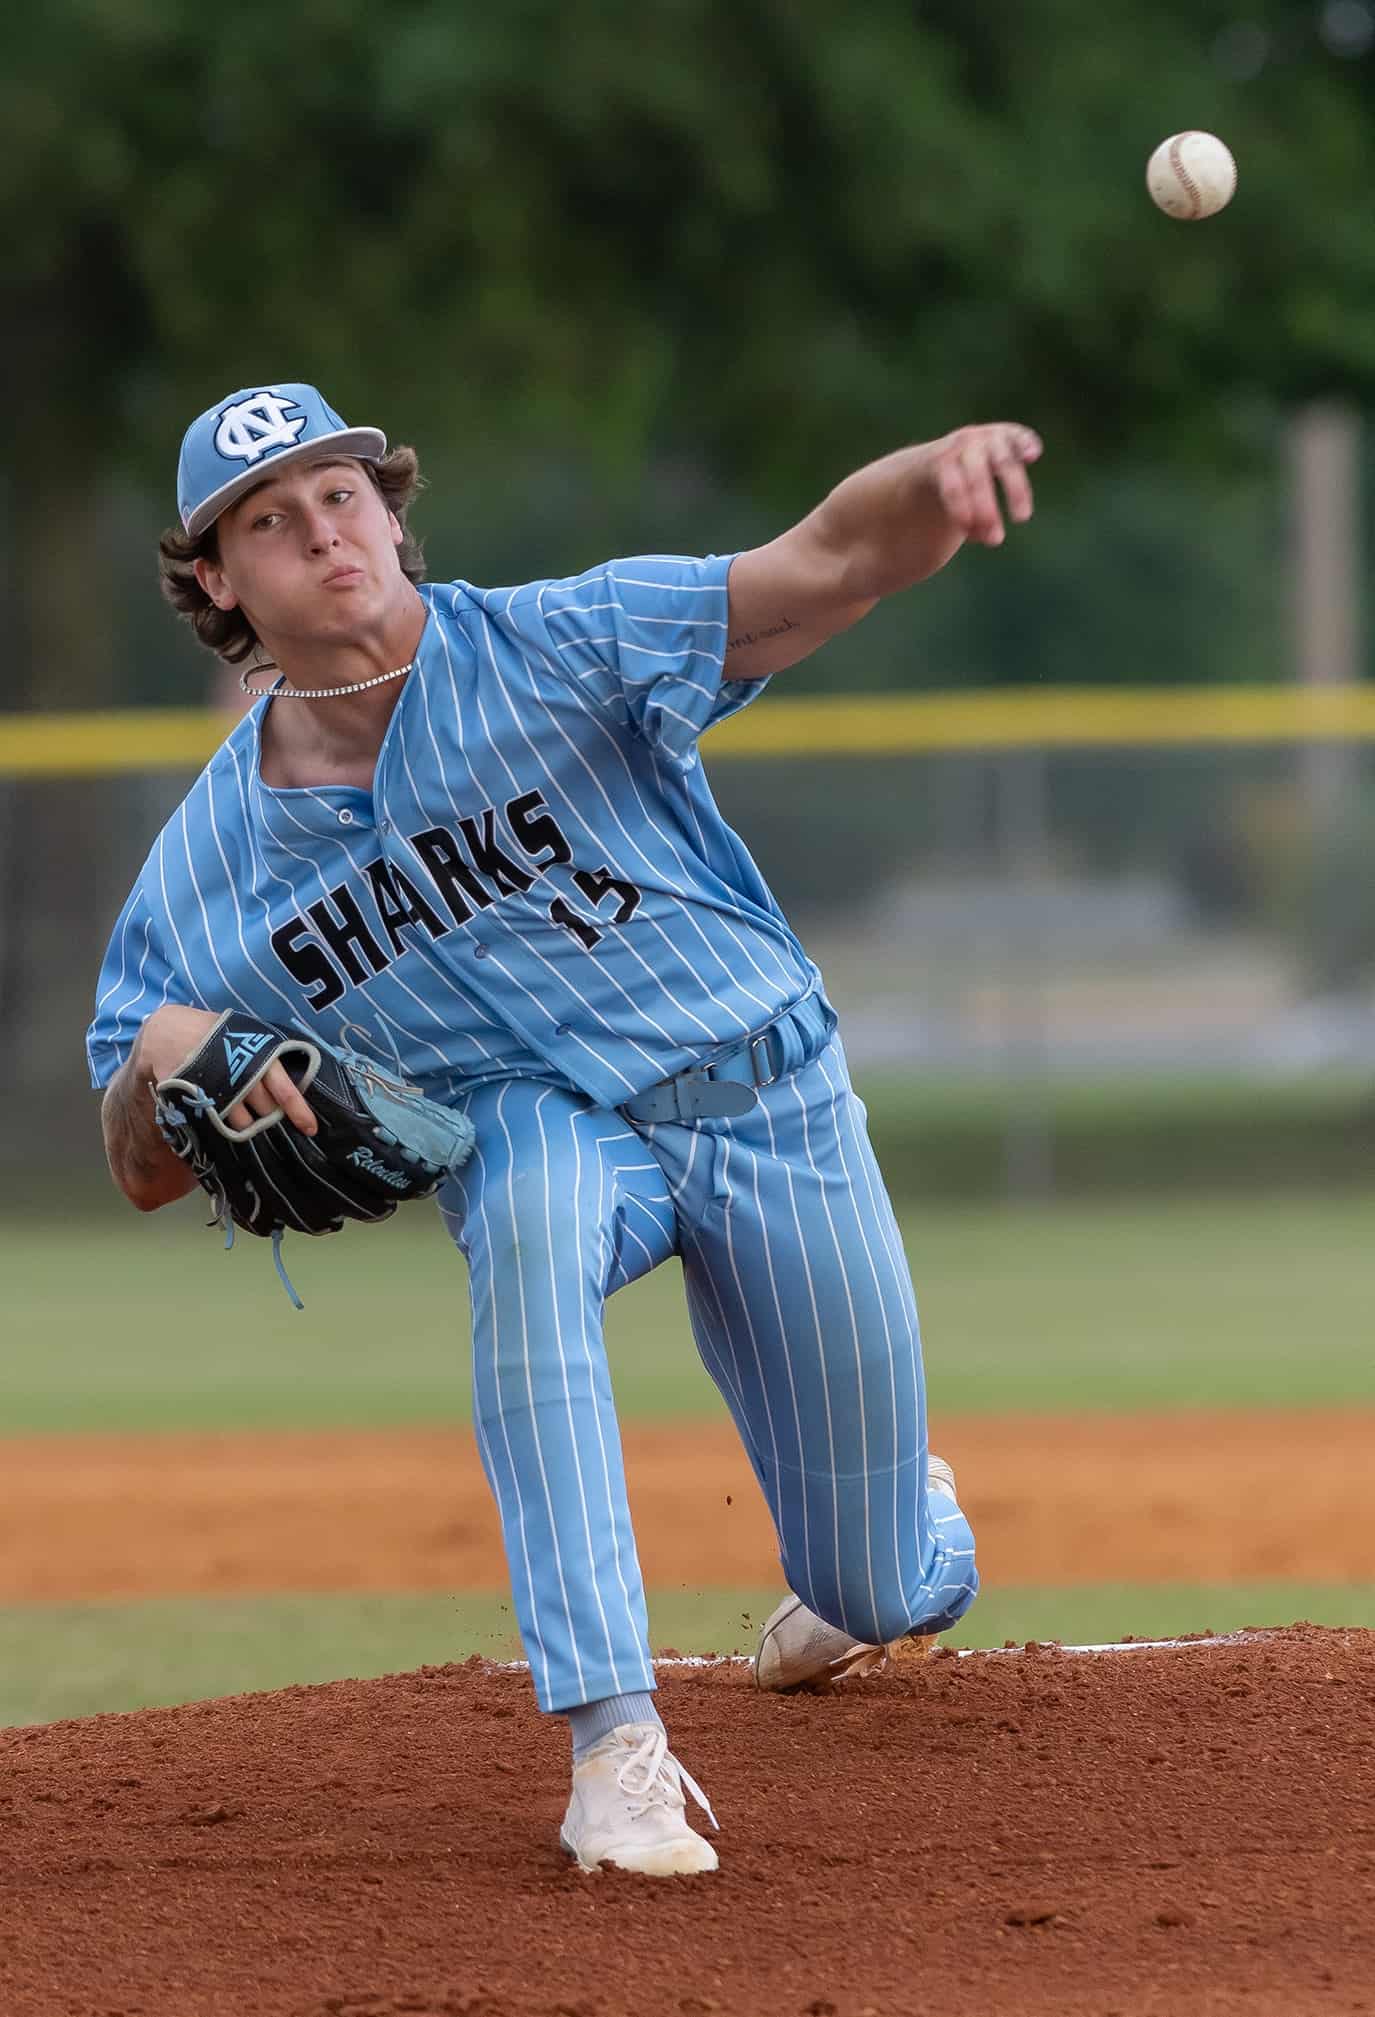 Nature Coast Tech pitcher, Jackson Hoyt pitched six scoreless innings against visiting Hernando High in the 4A District 6 title game. Photo by [Joseph Dicristofalo]